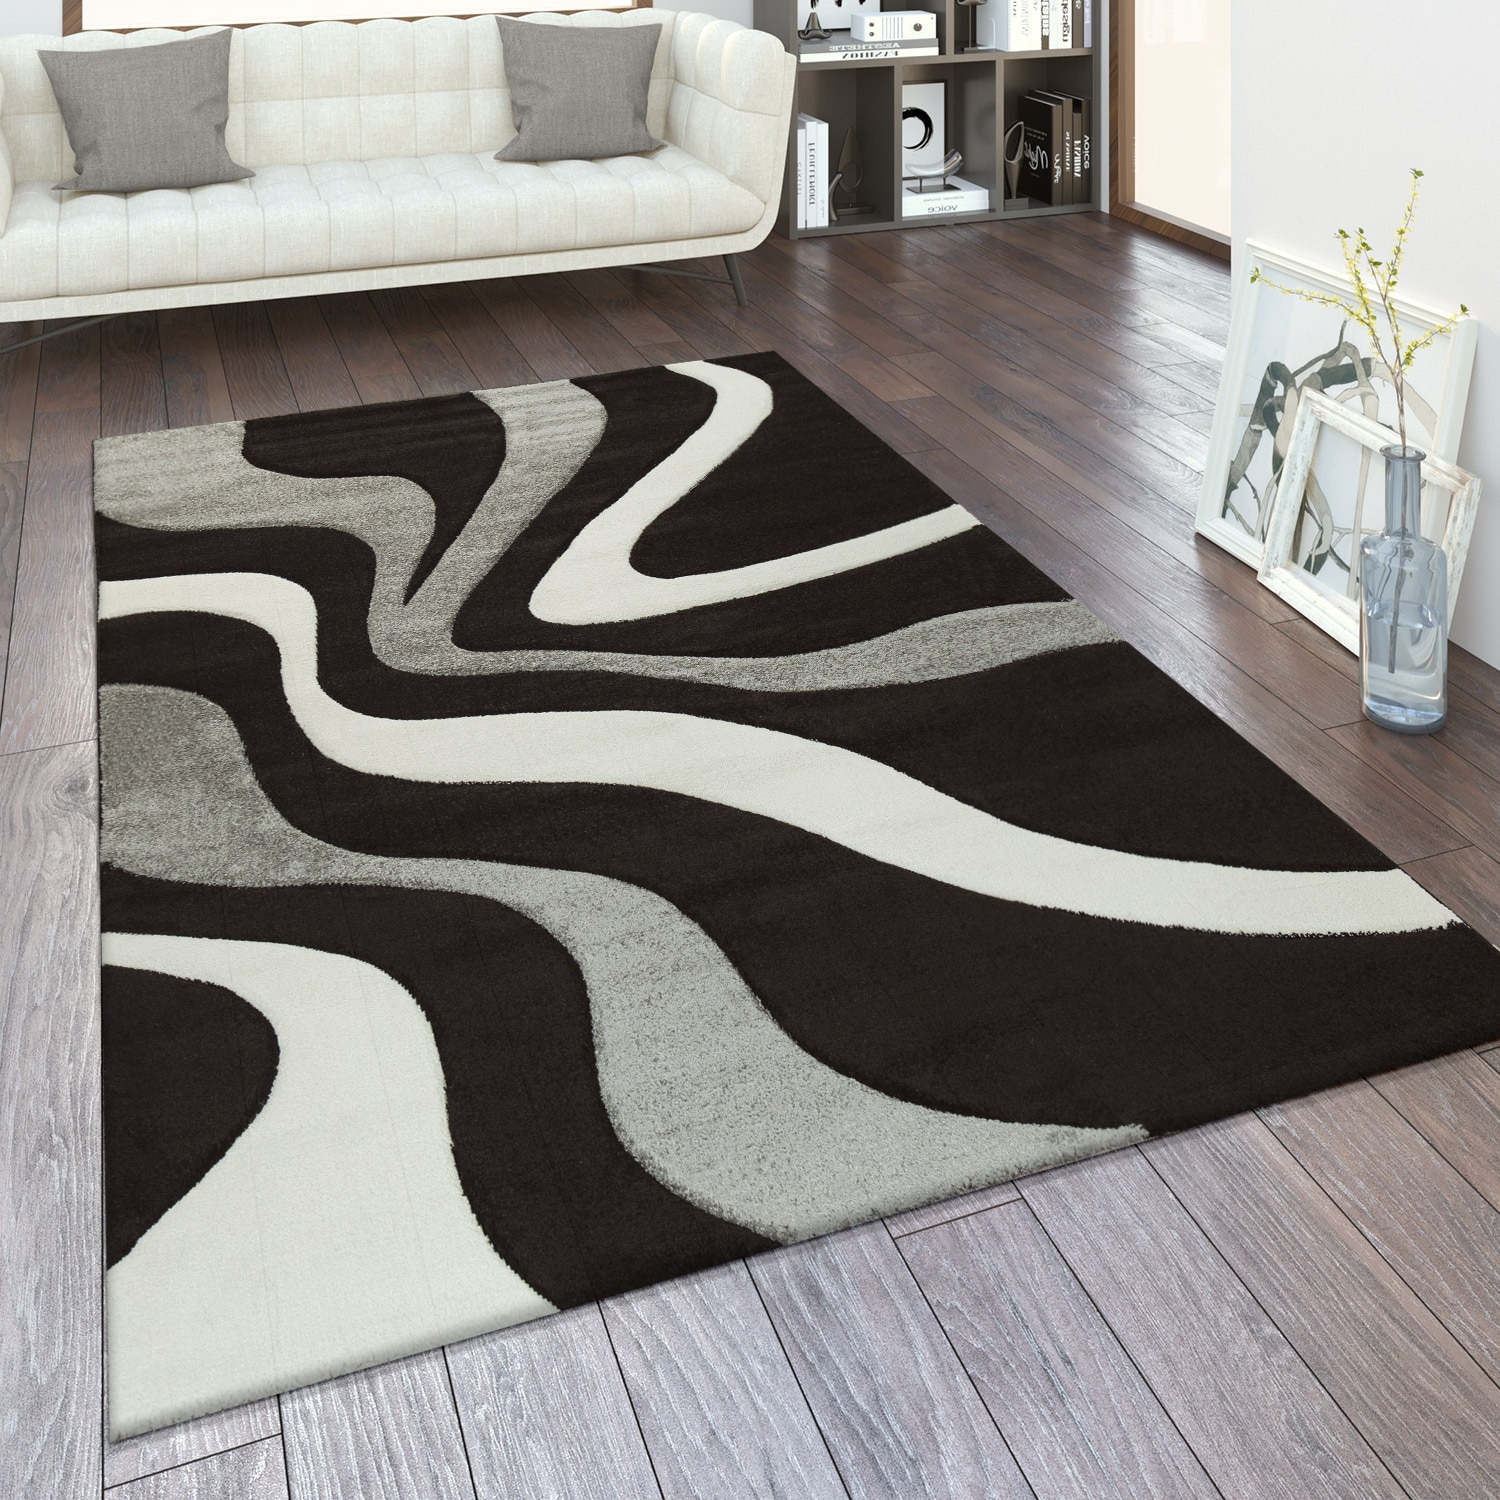 Paco Home Designer Area Rug with Contour Cut and Modern Wave Pattern 7'10" x 10'10" - Grey-blue - image 2 of 5